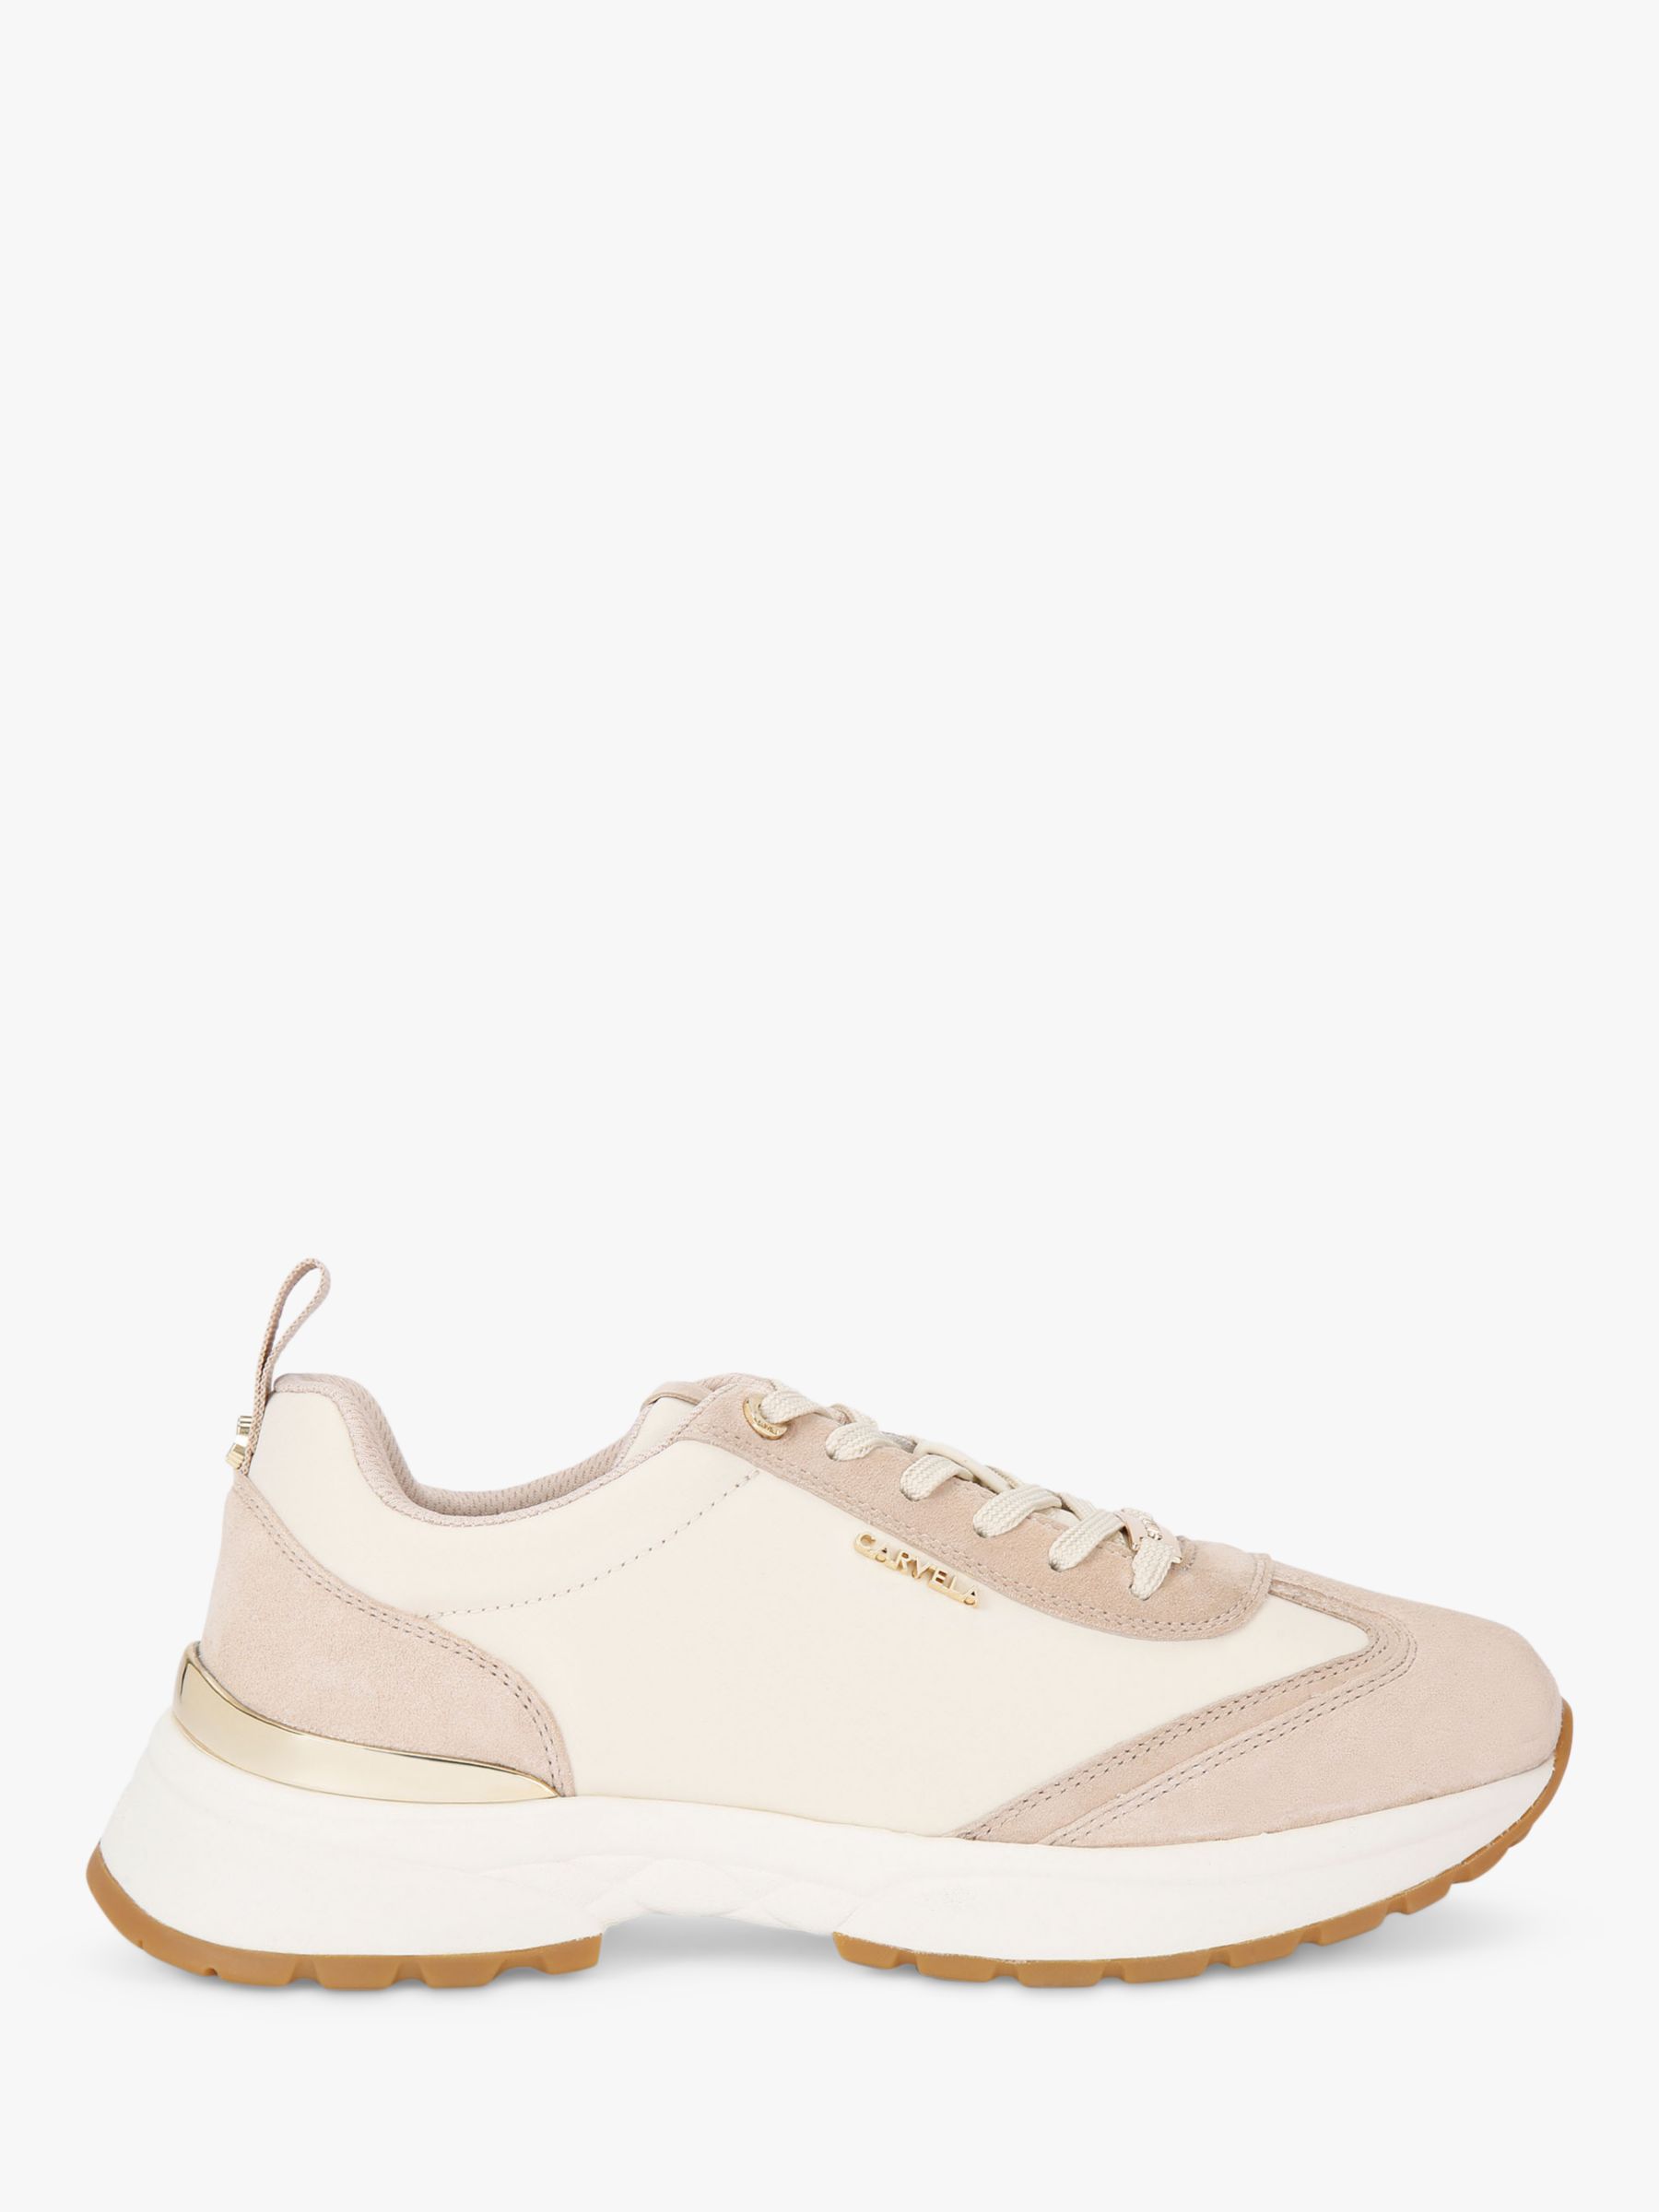 Carvela Parade Lace-Up Trainers, Natural Beige at John & Partners